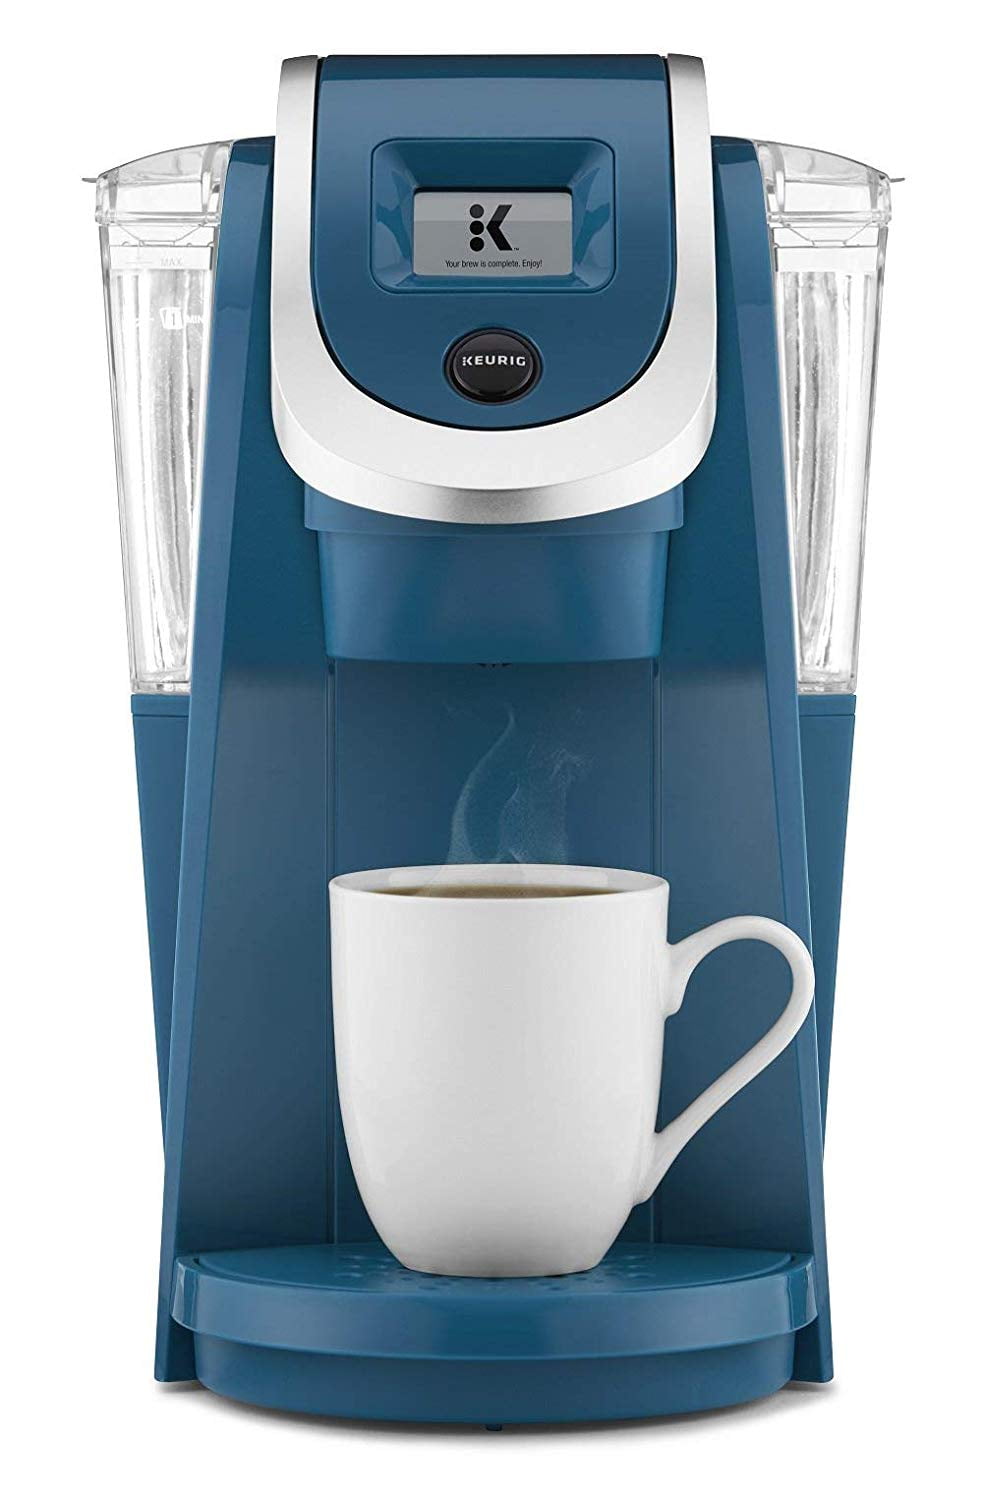 Details about   Sboly Brew Coffee Maker Single Serve K-Cup Ground 2 In1 Self-Cleaning Percolator 